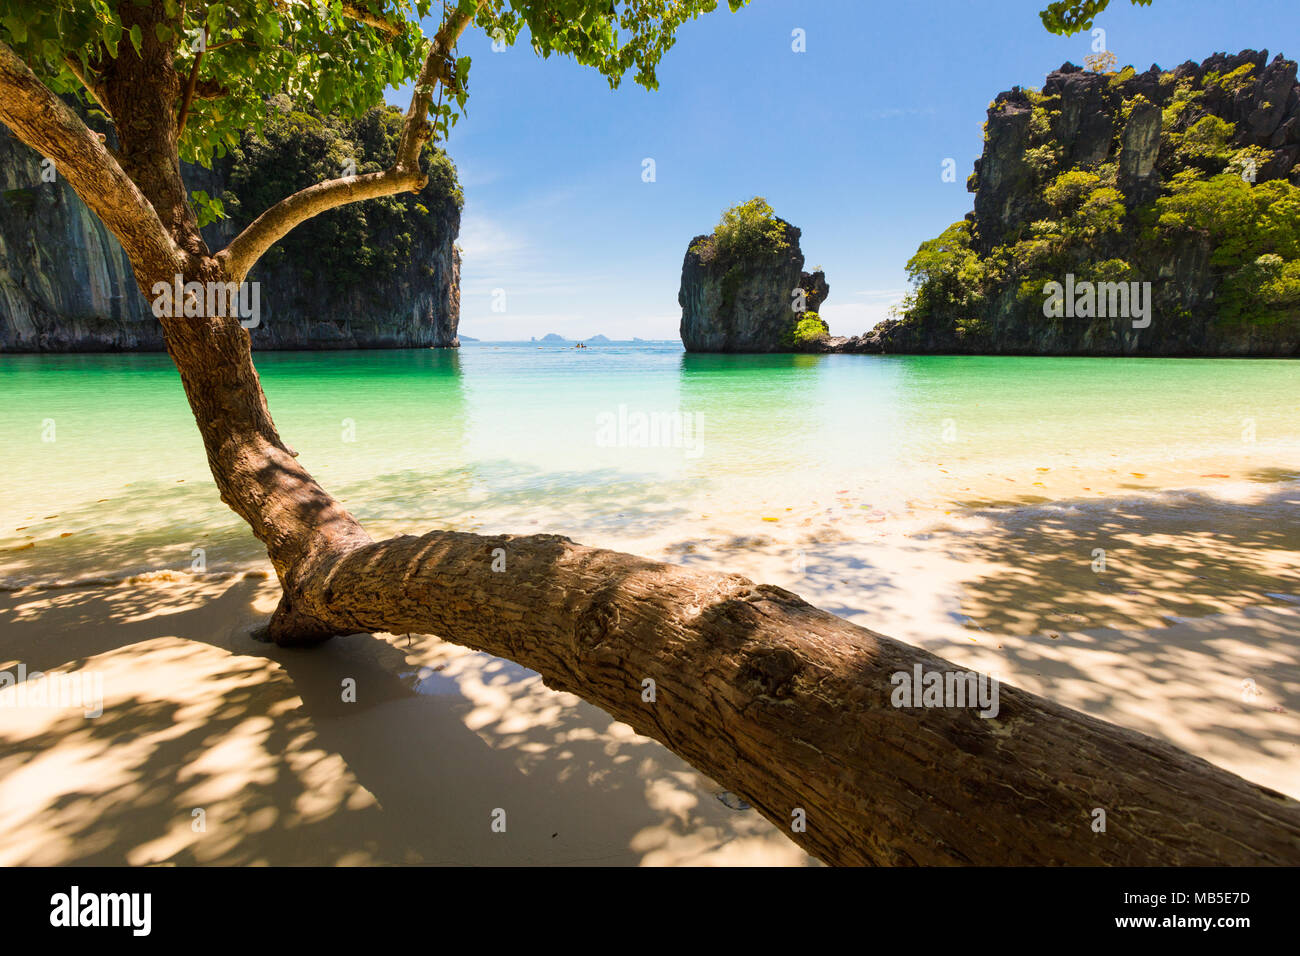 Bent Tree Growing On Shore At Beach Stock Photo